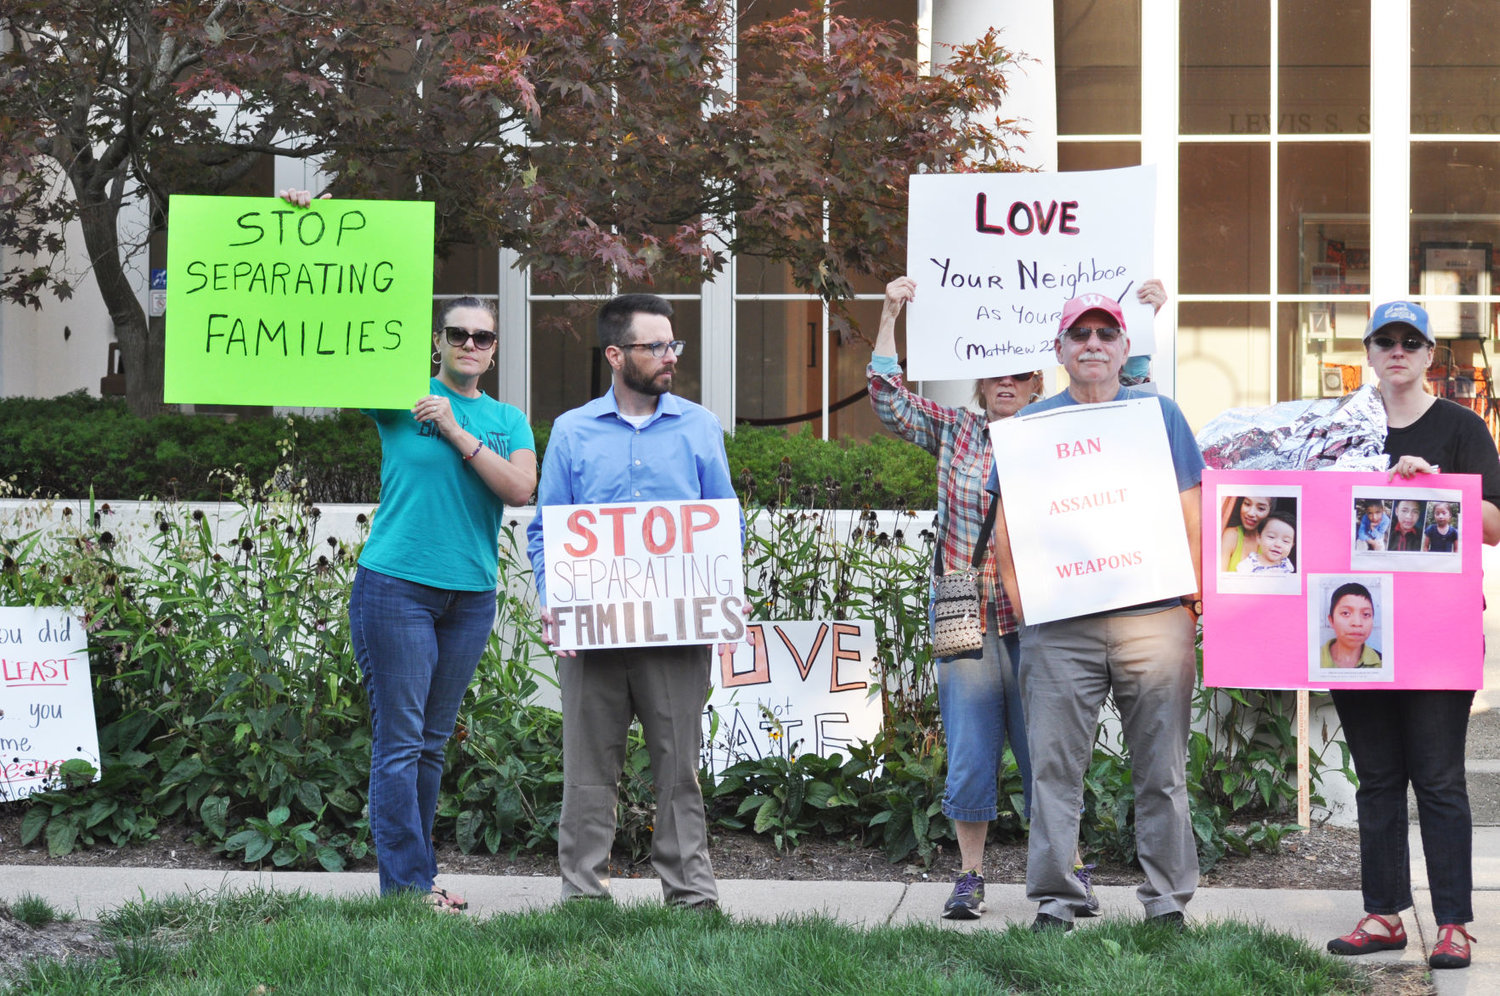 Members of Humans United for Equality protest the Trump administration's immigration policies and call for stronger gun control Tuesday before Sen. Mike Braun's appearance at Wabash College. The protesters were part of a group of about 10 people calling for Braun to oppose Trump's southern border policies.